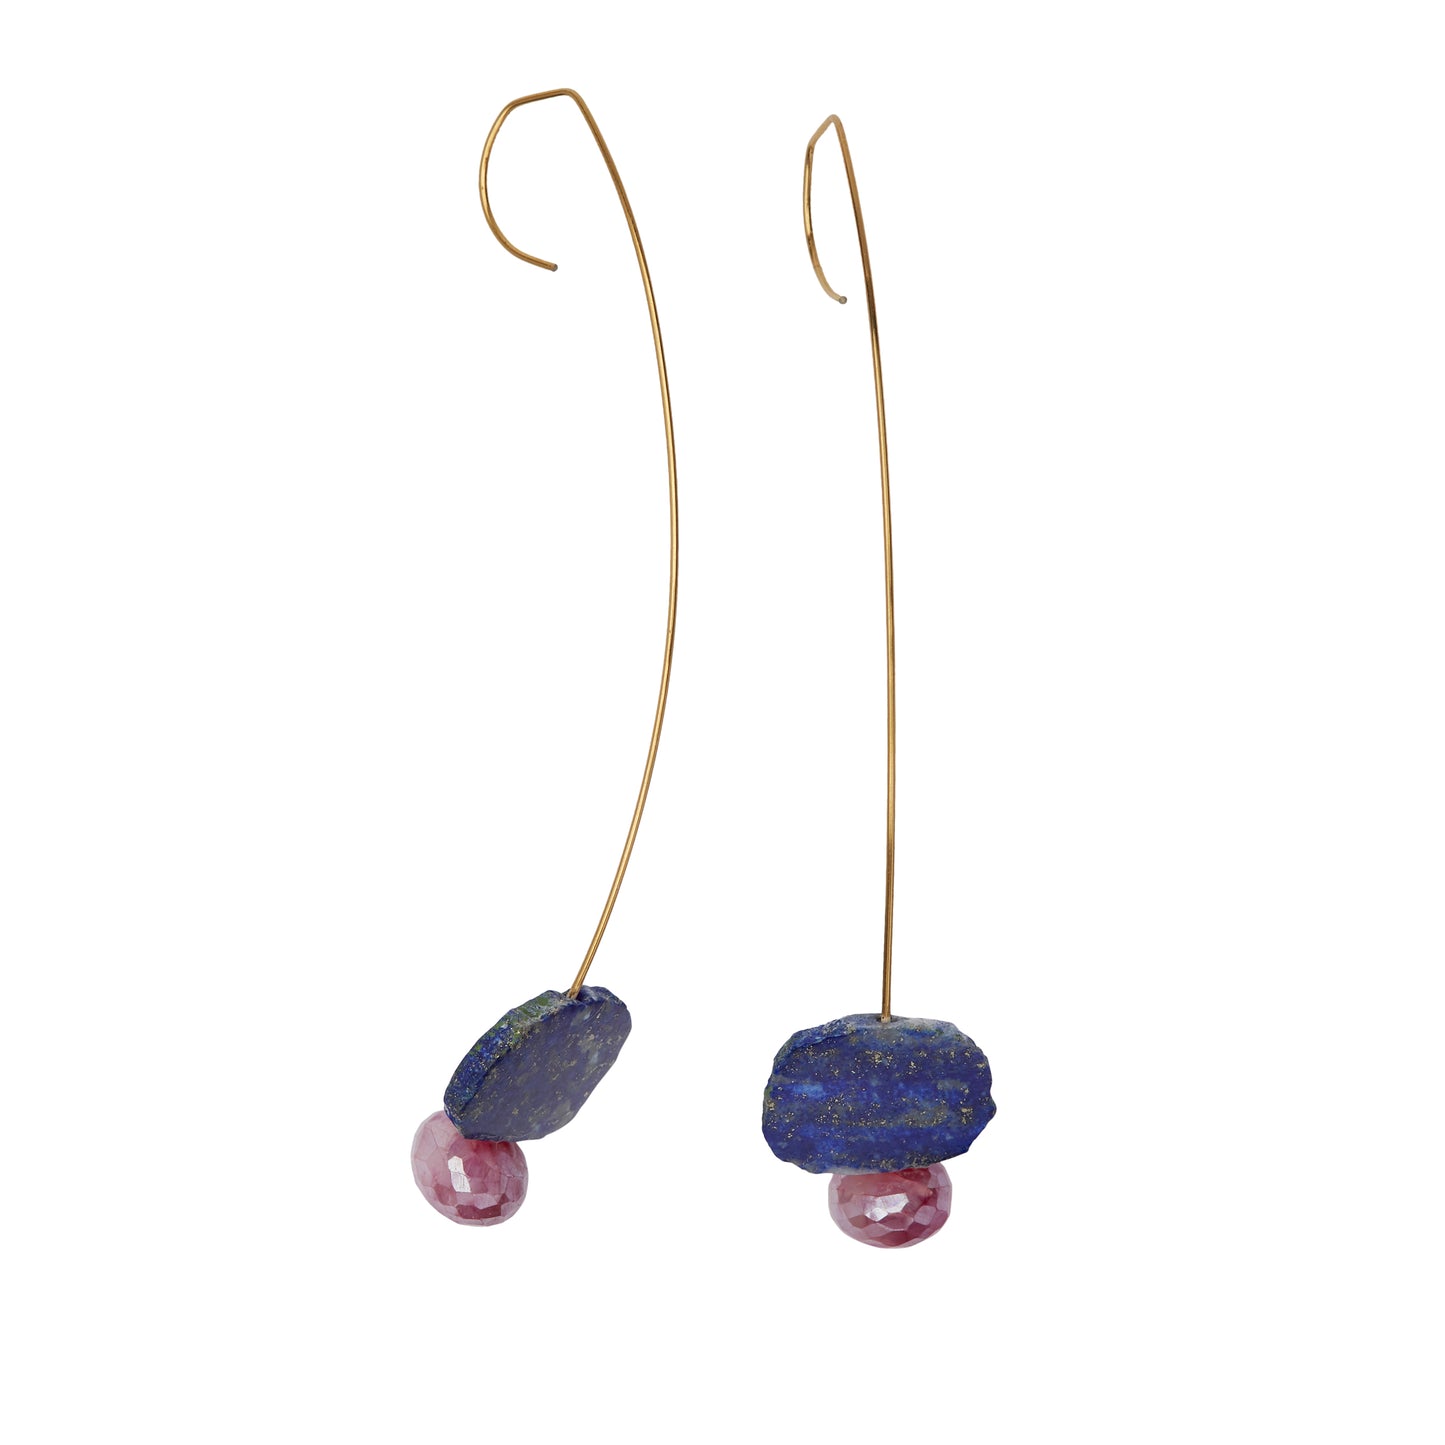 Medium Drop Earrings with Lapis Lazuli and Pink Mystic Chalcedony roundel